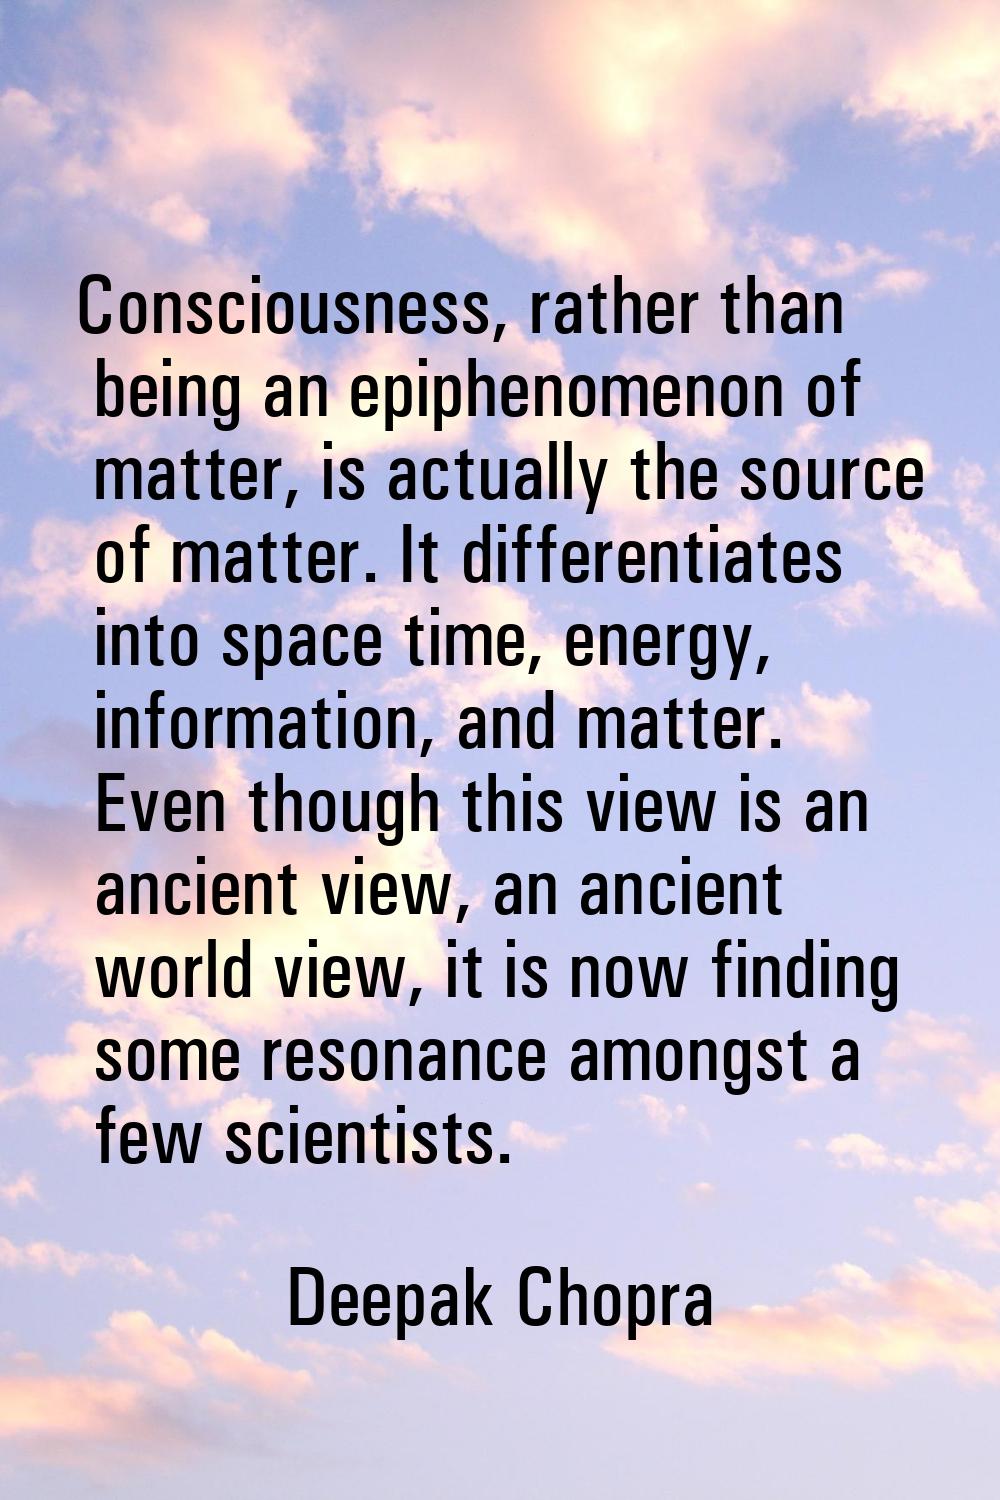 Consciousness, rather than being an epiphenomenon of matter, is actually the source of matter. It d